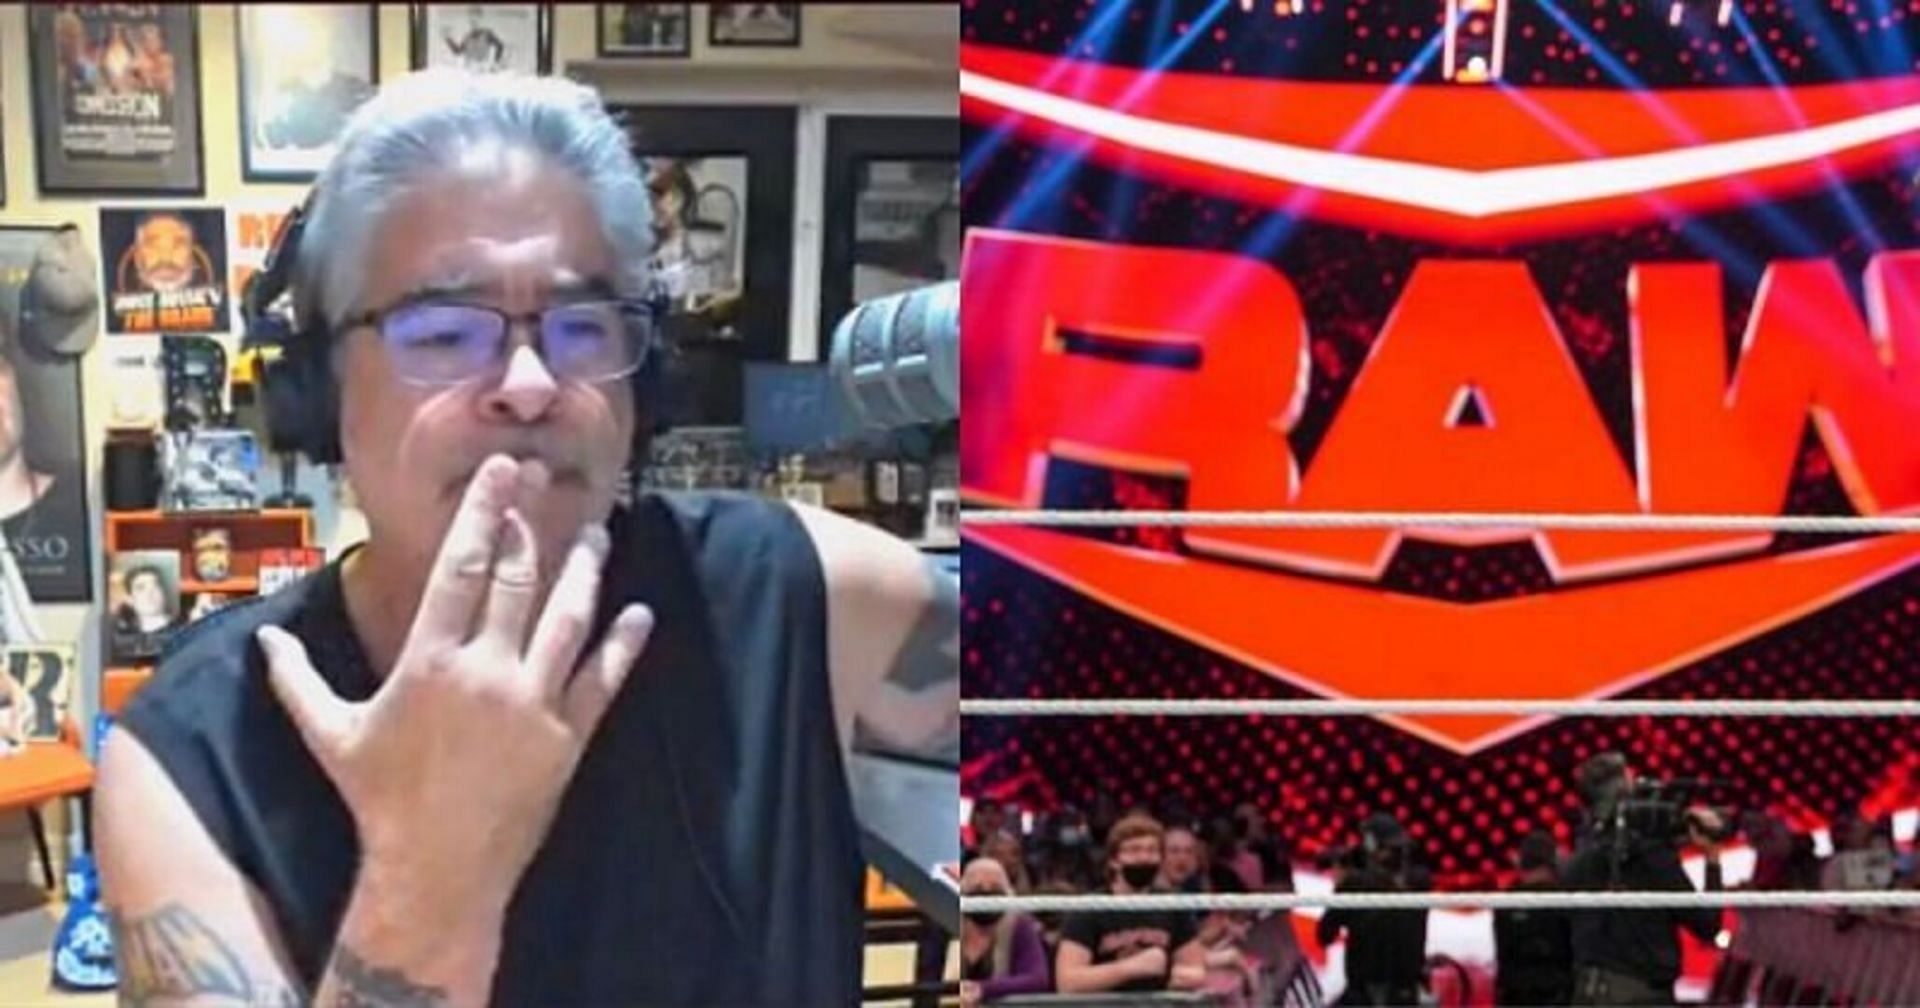 Vince Russo slammed the WWE RAW segment featuring 24/7 title